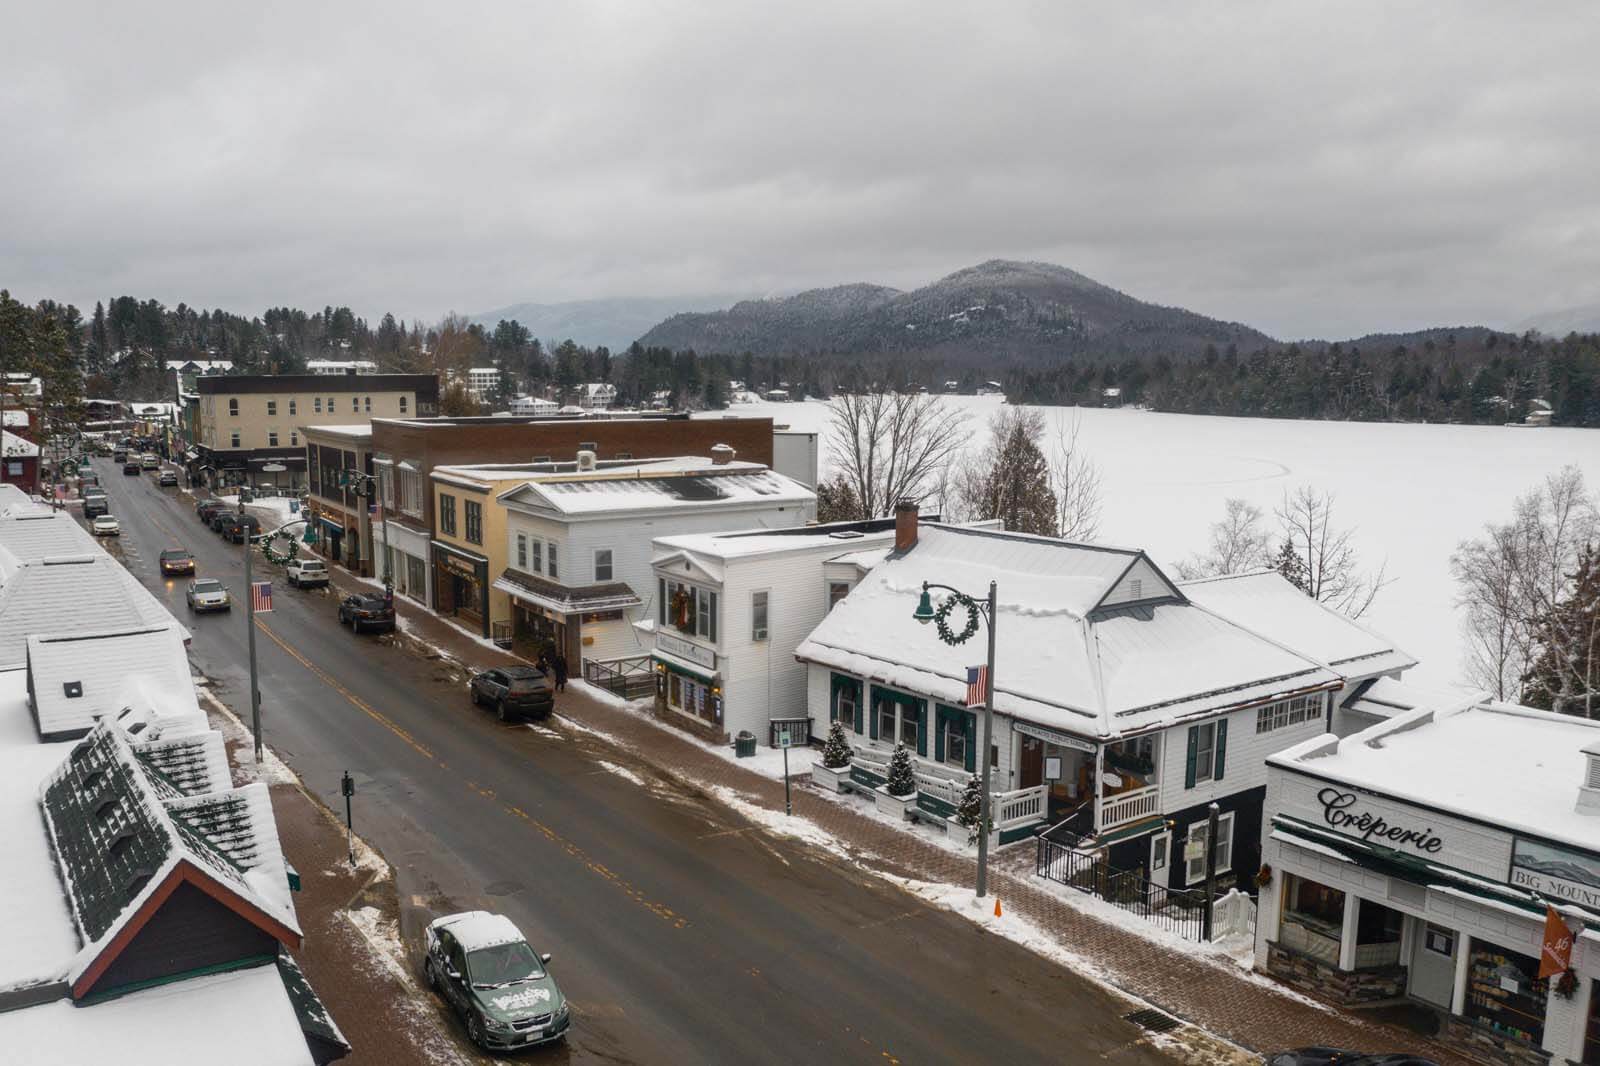 shops along the main street in downtown Lake Placid in winter